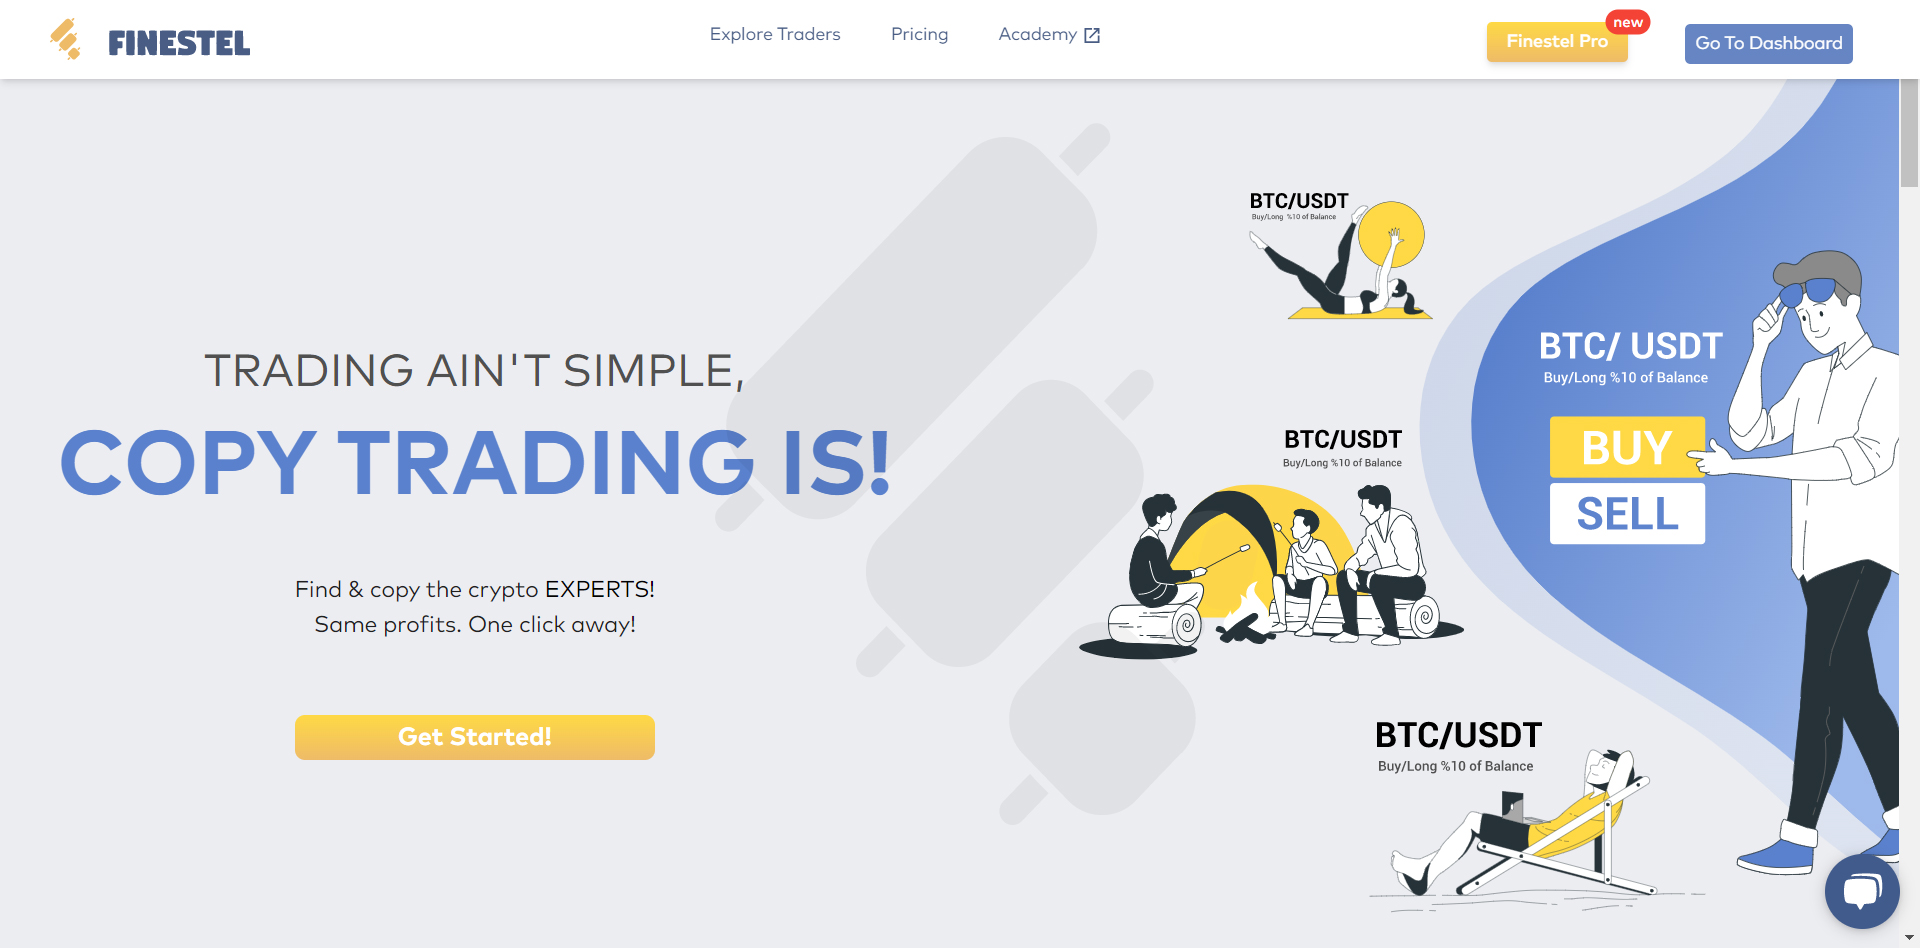 copy trading platforms that support the futures market, Finestel